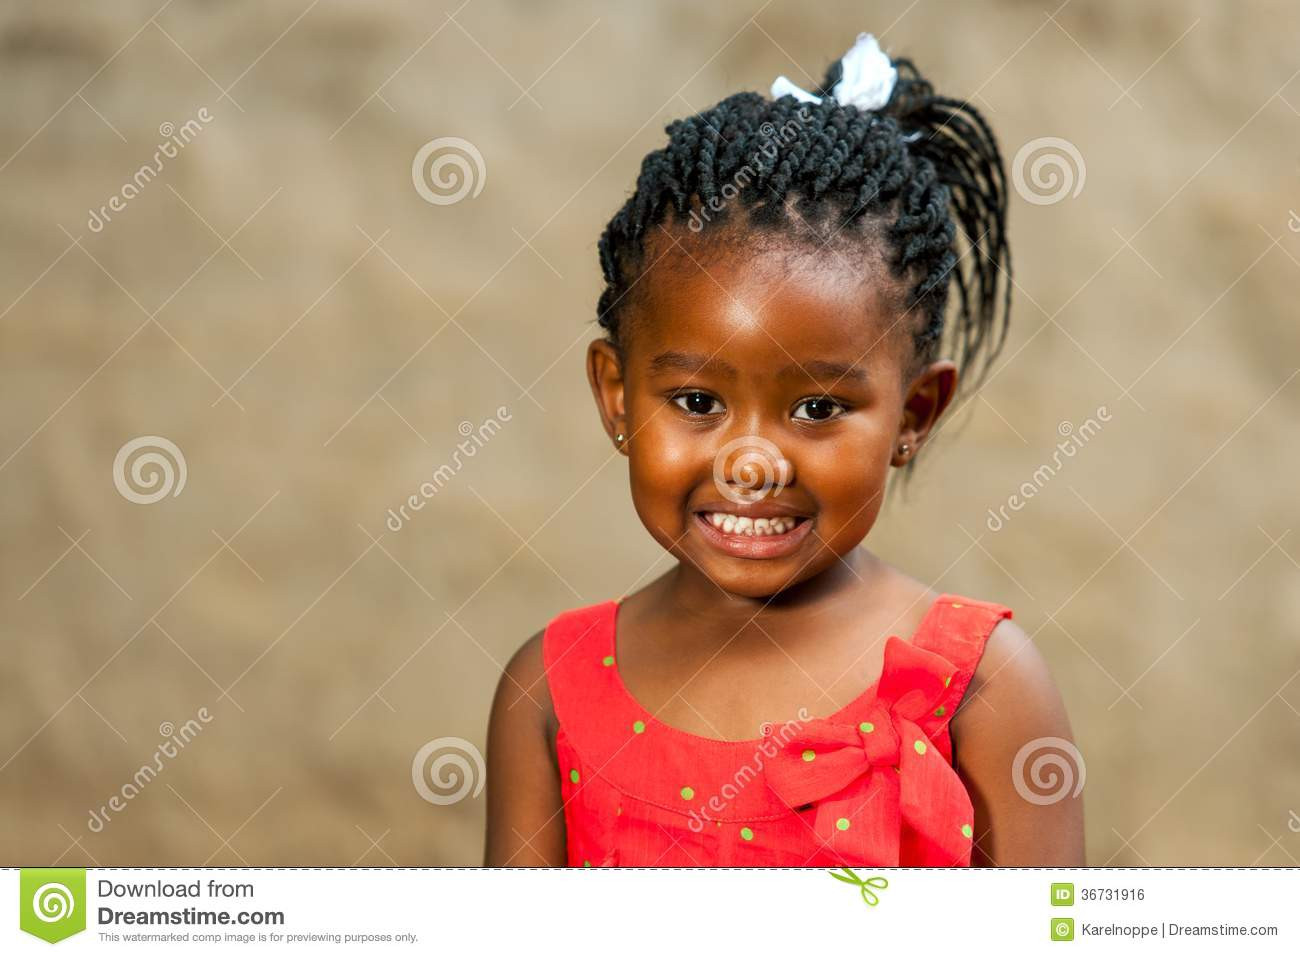 Little Girl Hairstyles African American Pictures
 Little African Girl With Braided Hairstyle Stock